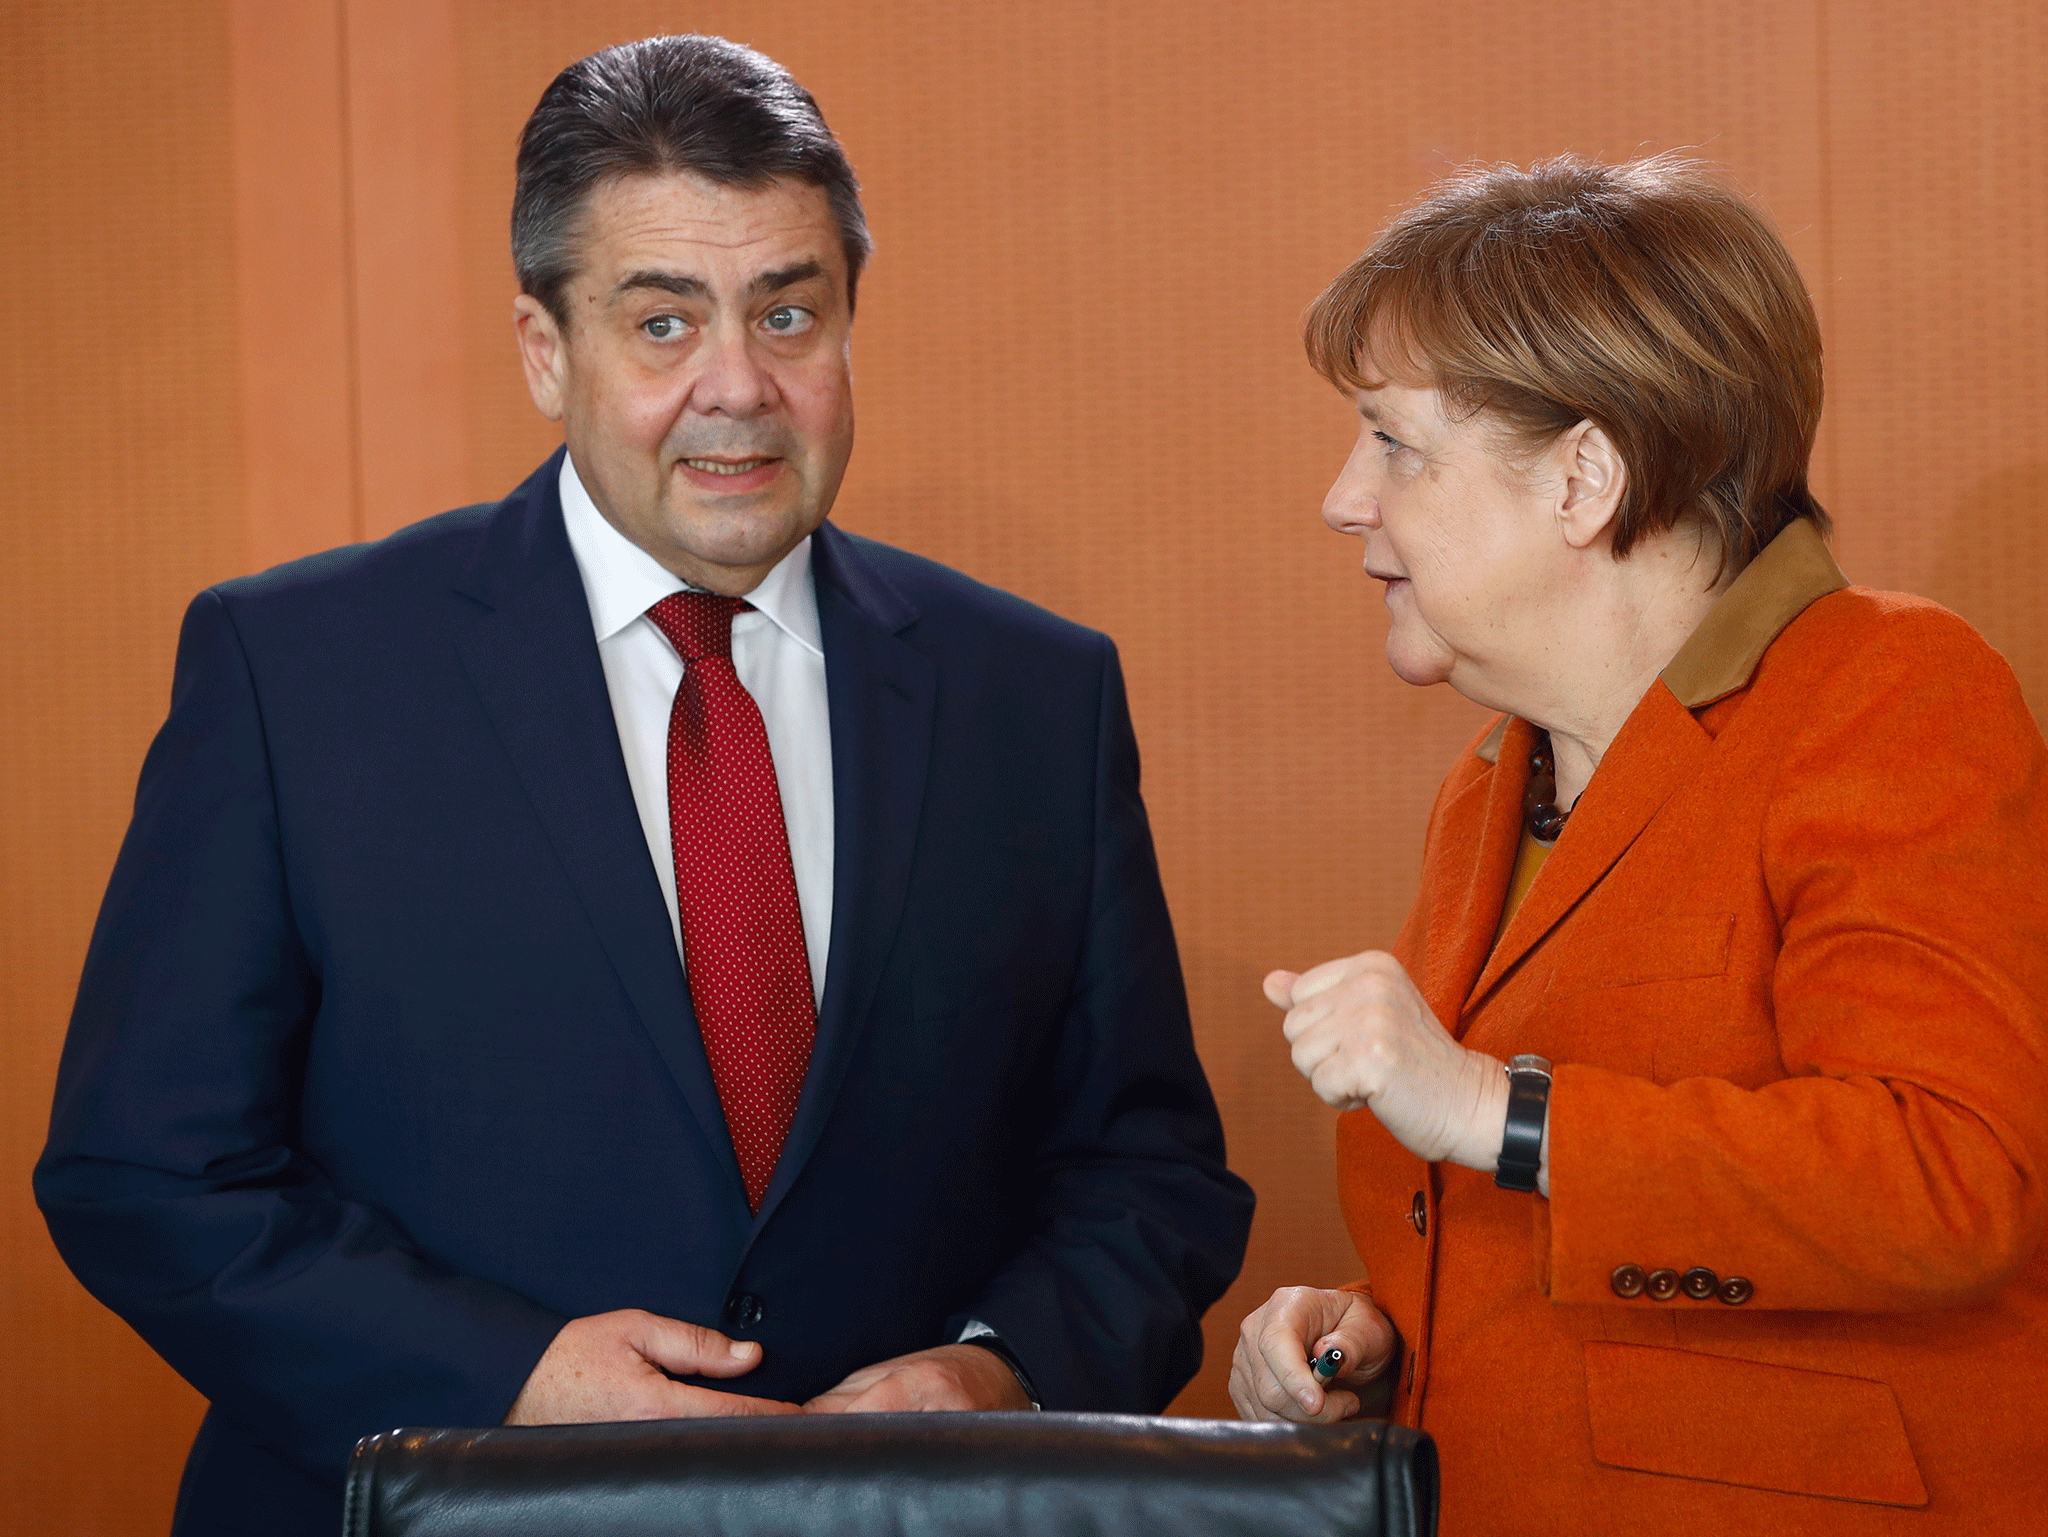 Sigmar Gabriel said the EU and the UK need each other and should maintain friendly relations